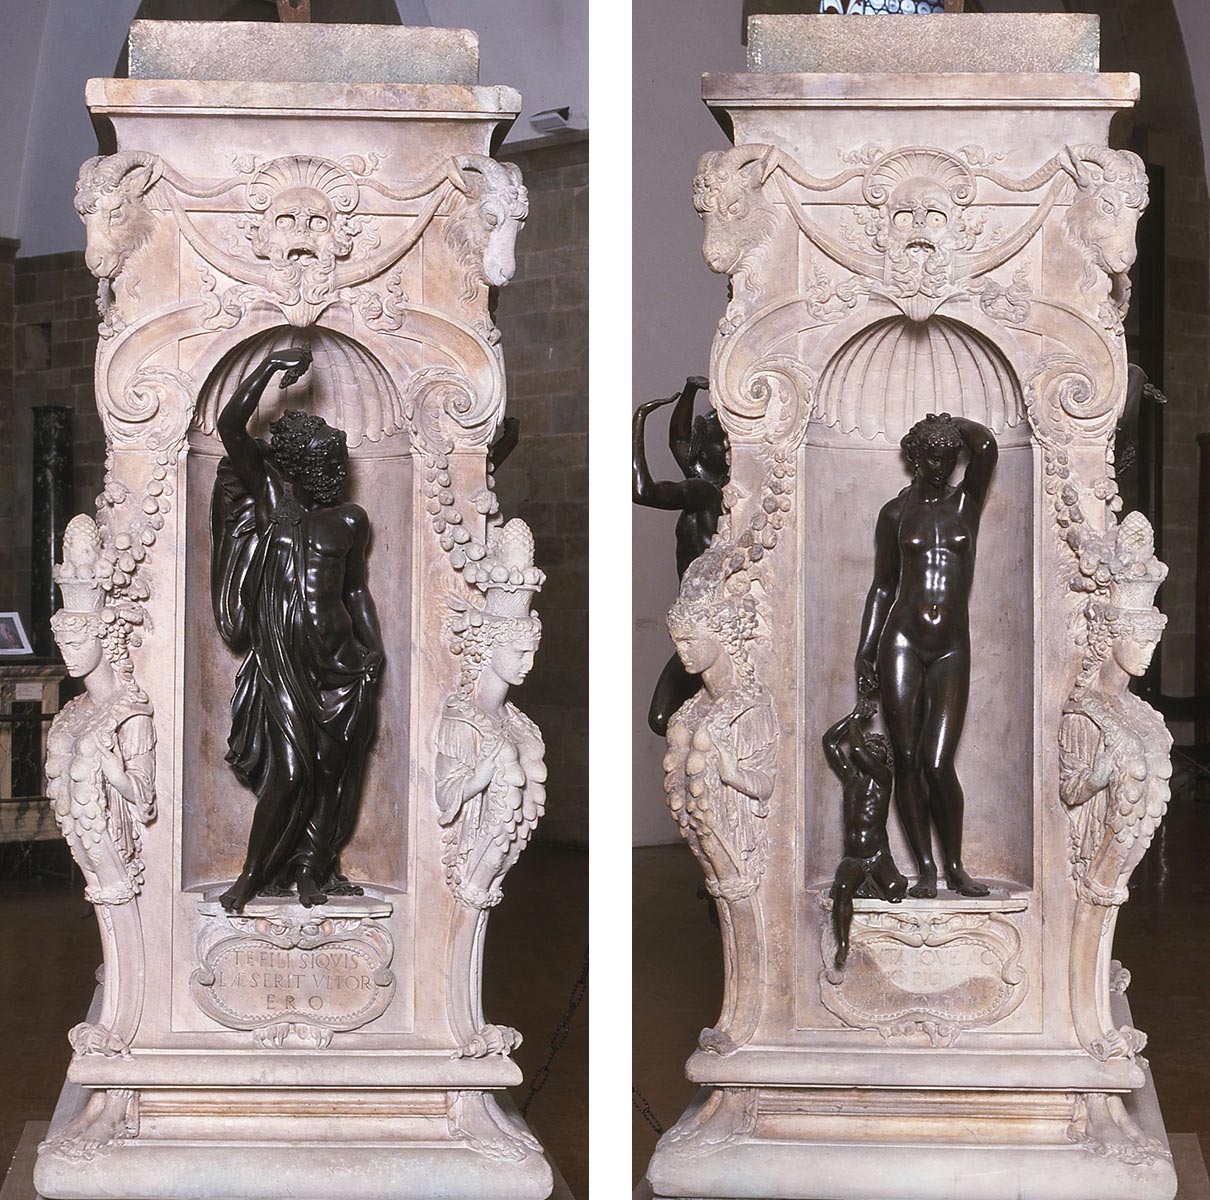 Statues of Jupiter and Danae. Photo: Ministry of Culture